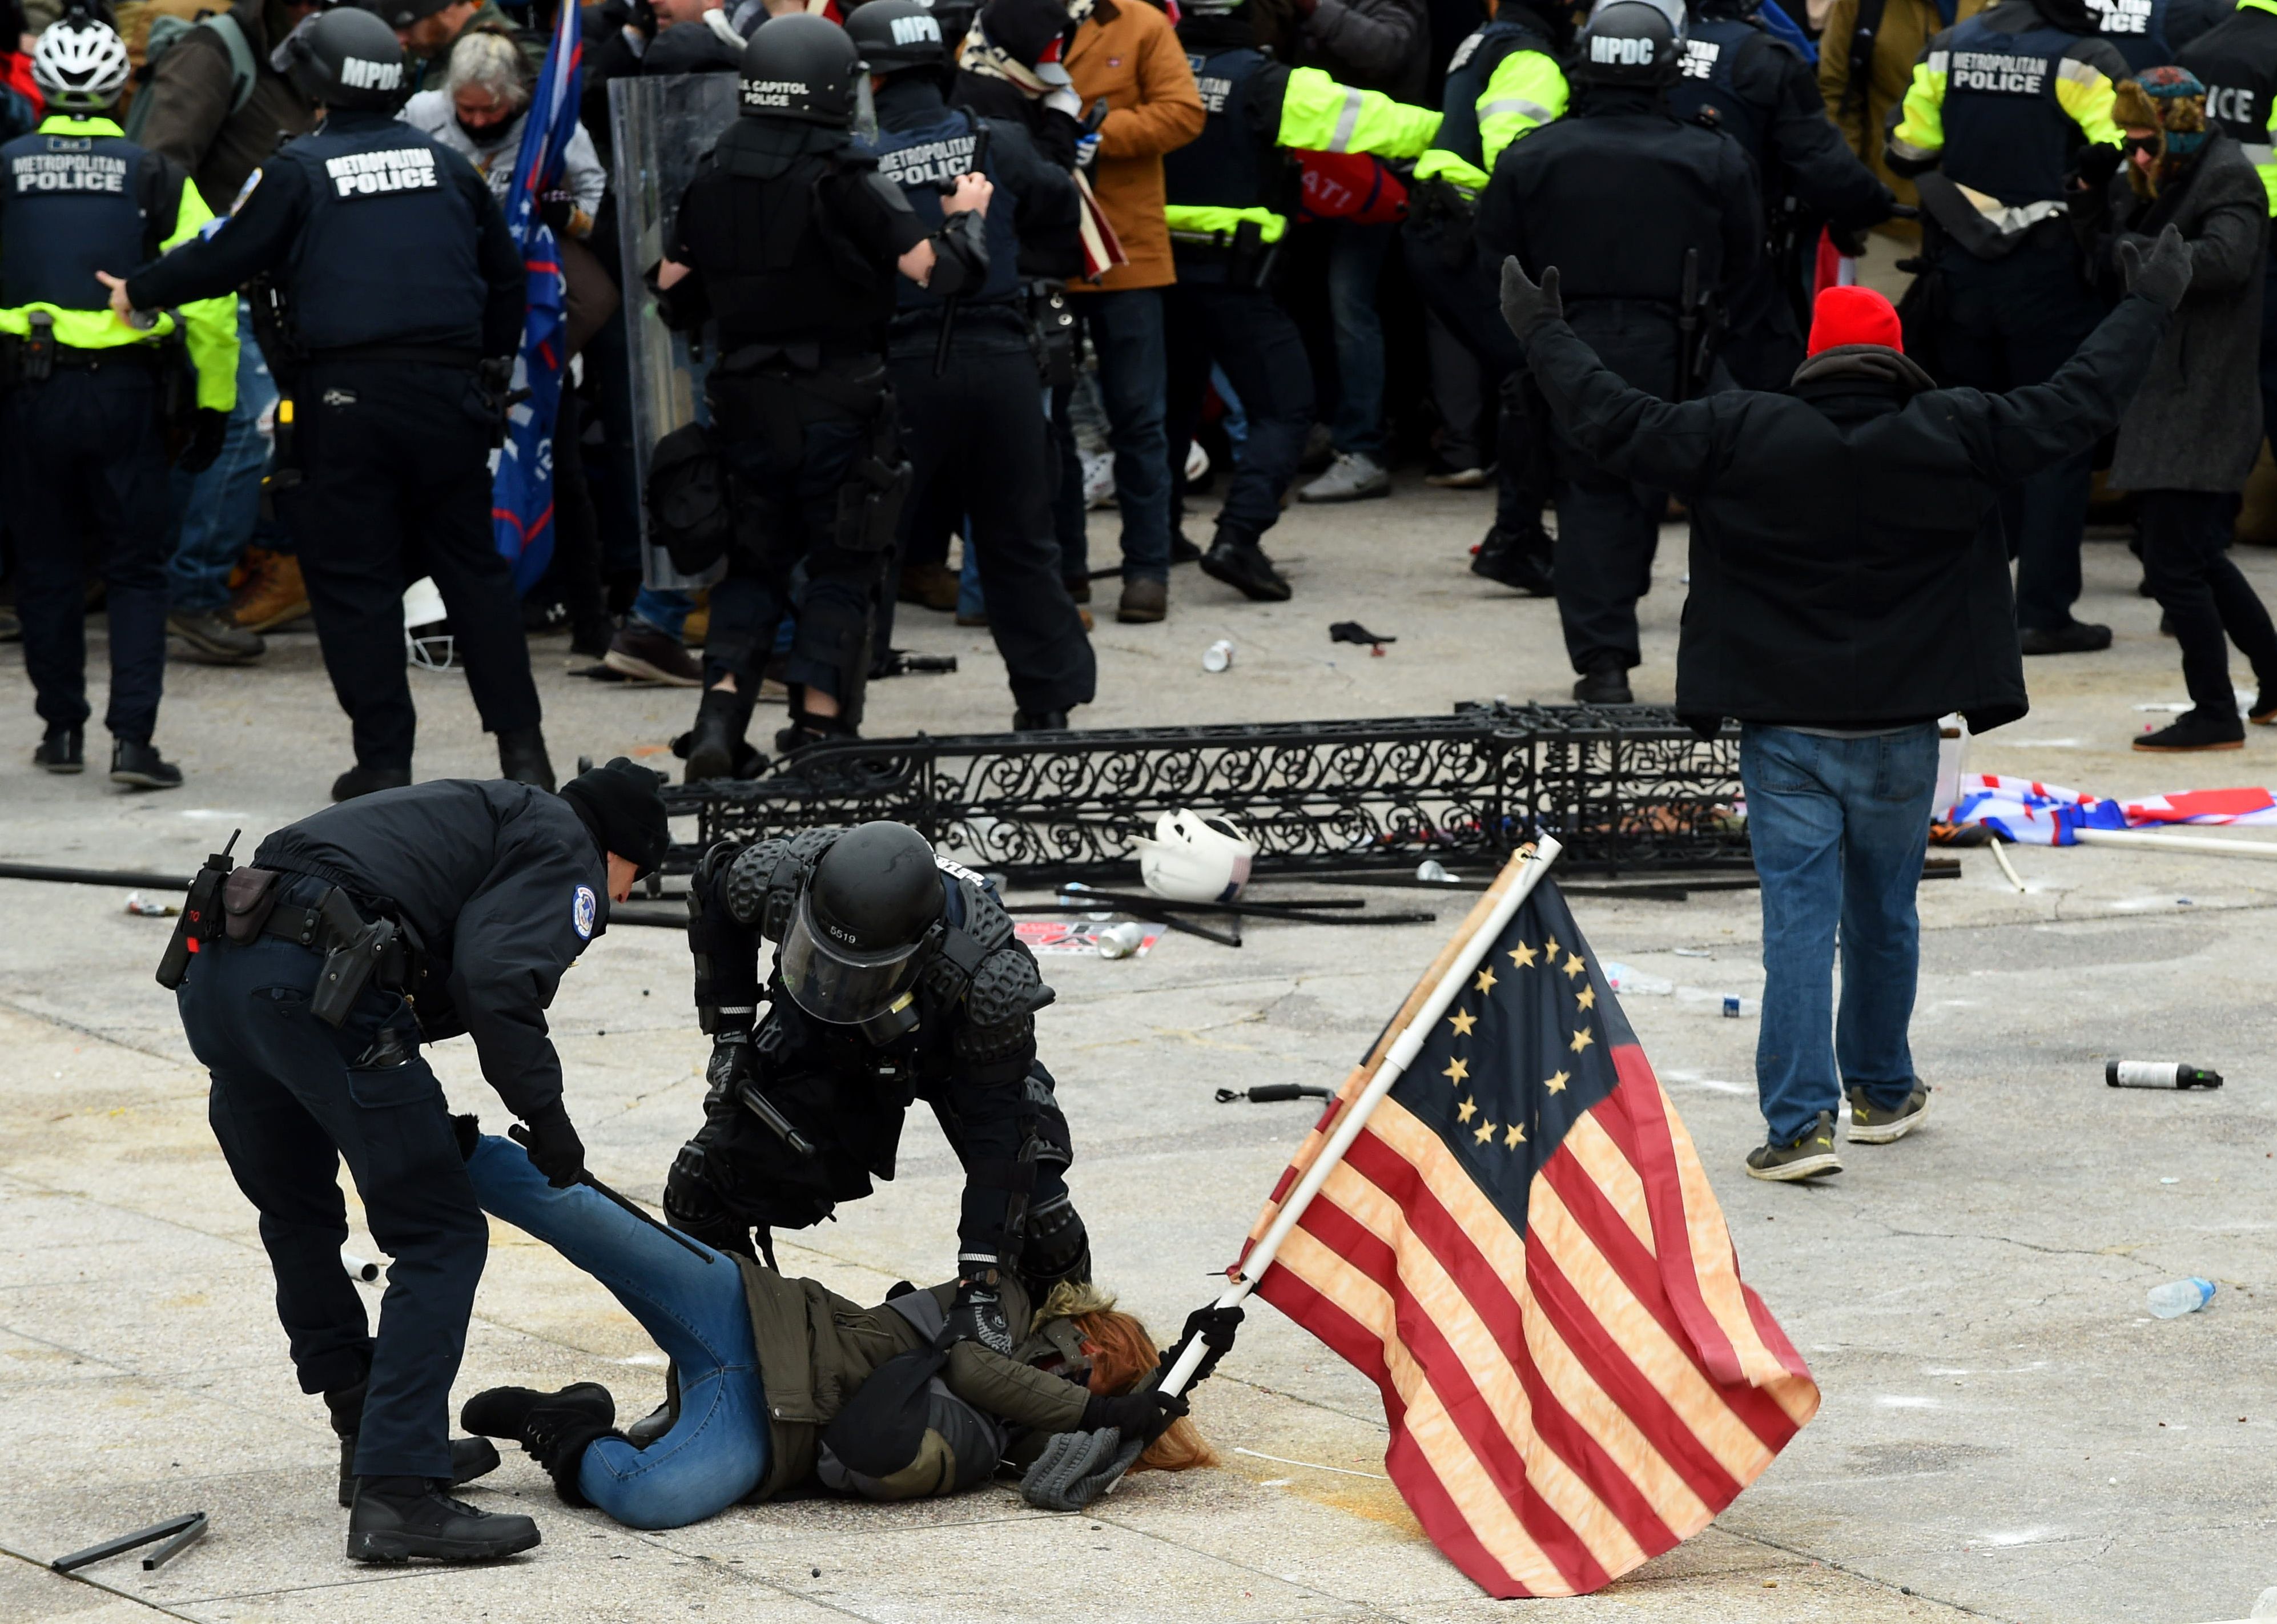 File image: Police detain a person as Trump supporters riot outside the Capitol on 6 January